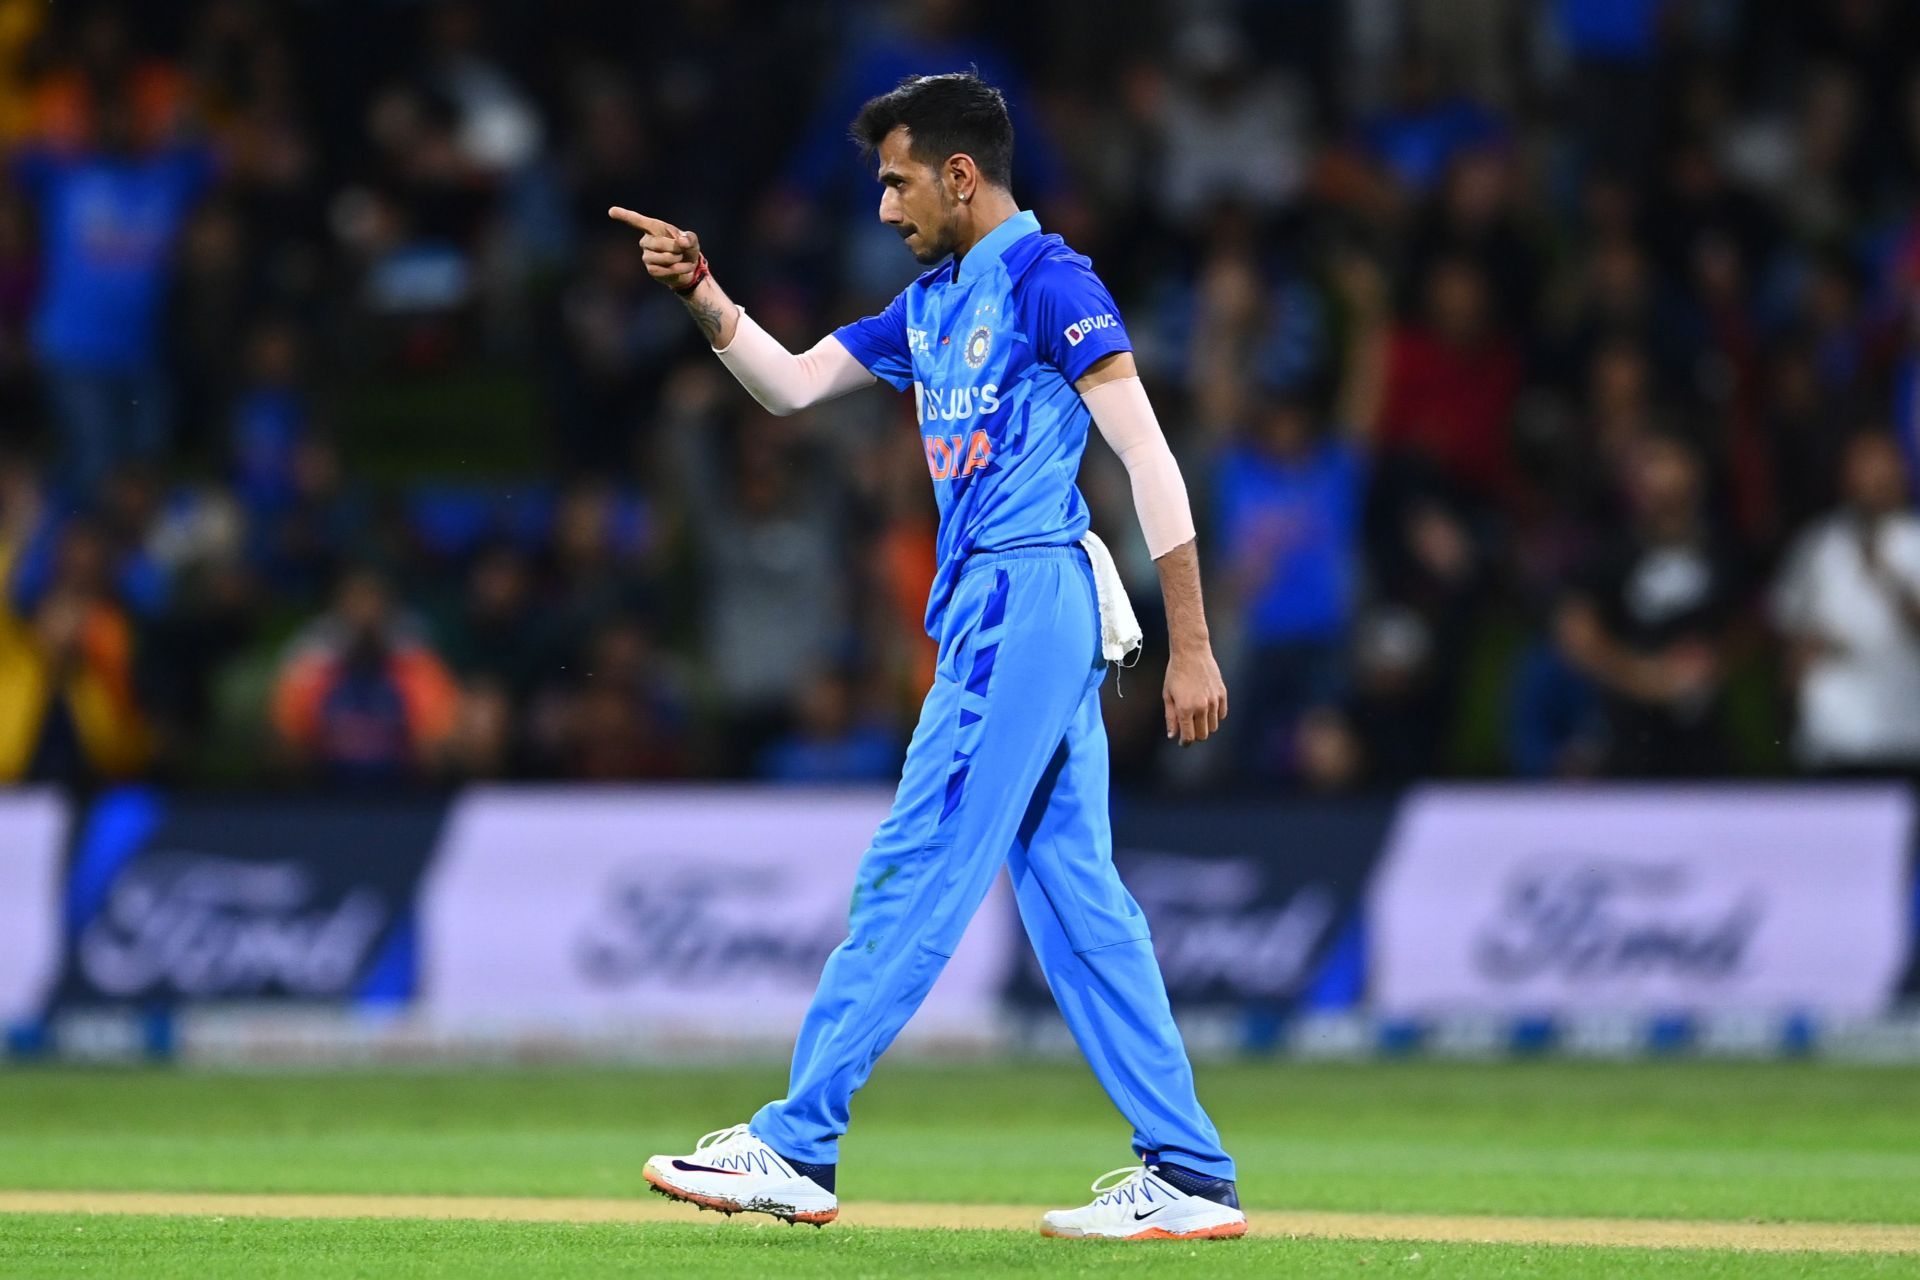 Yuzvendra Chahal was held back for the 20th over.